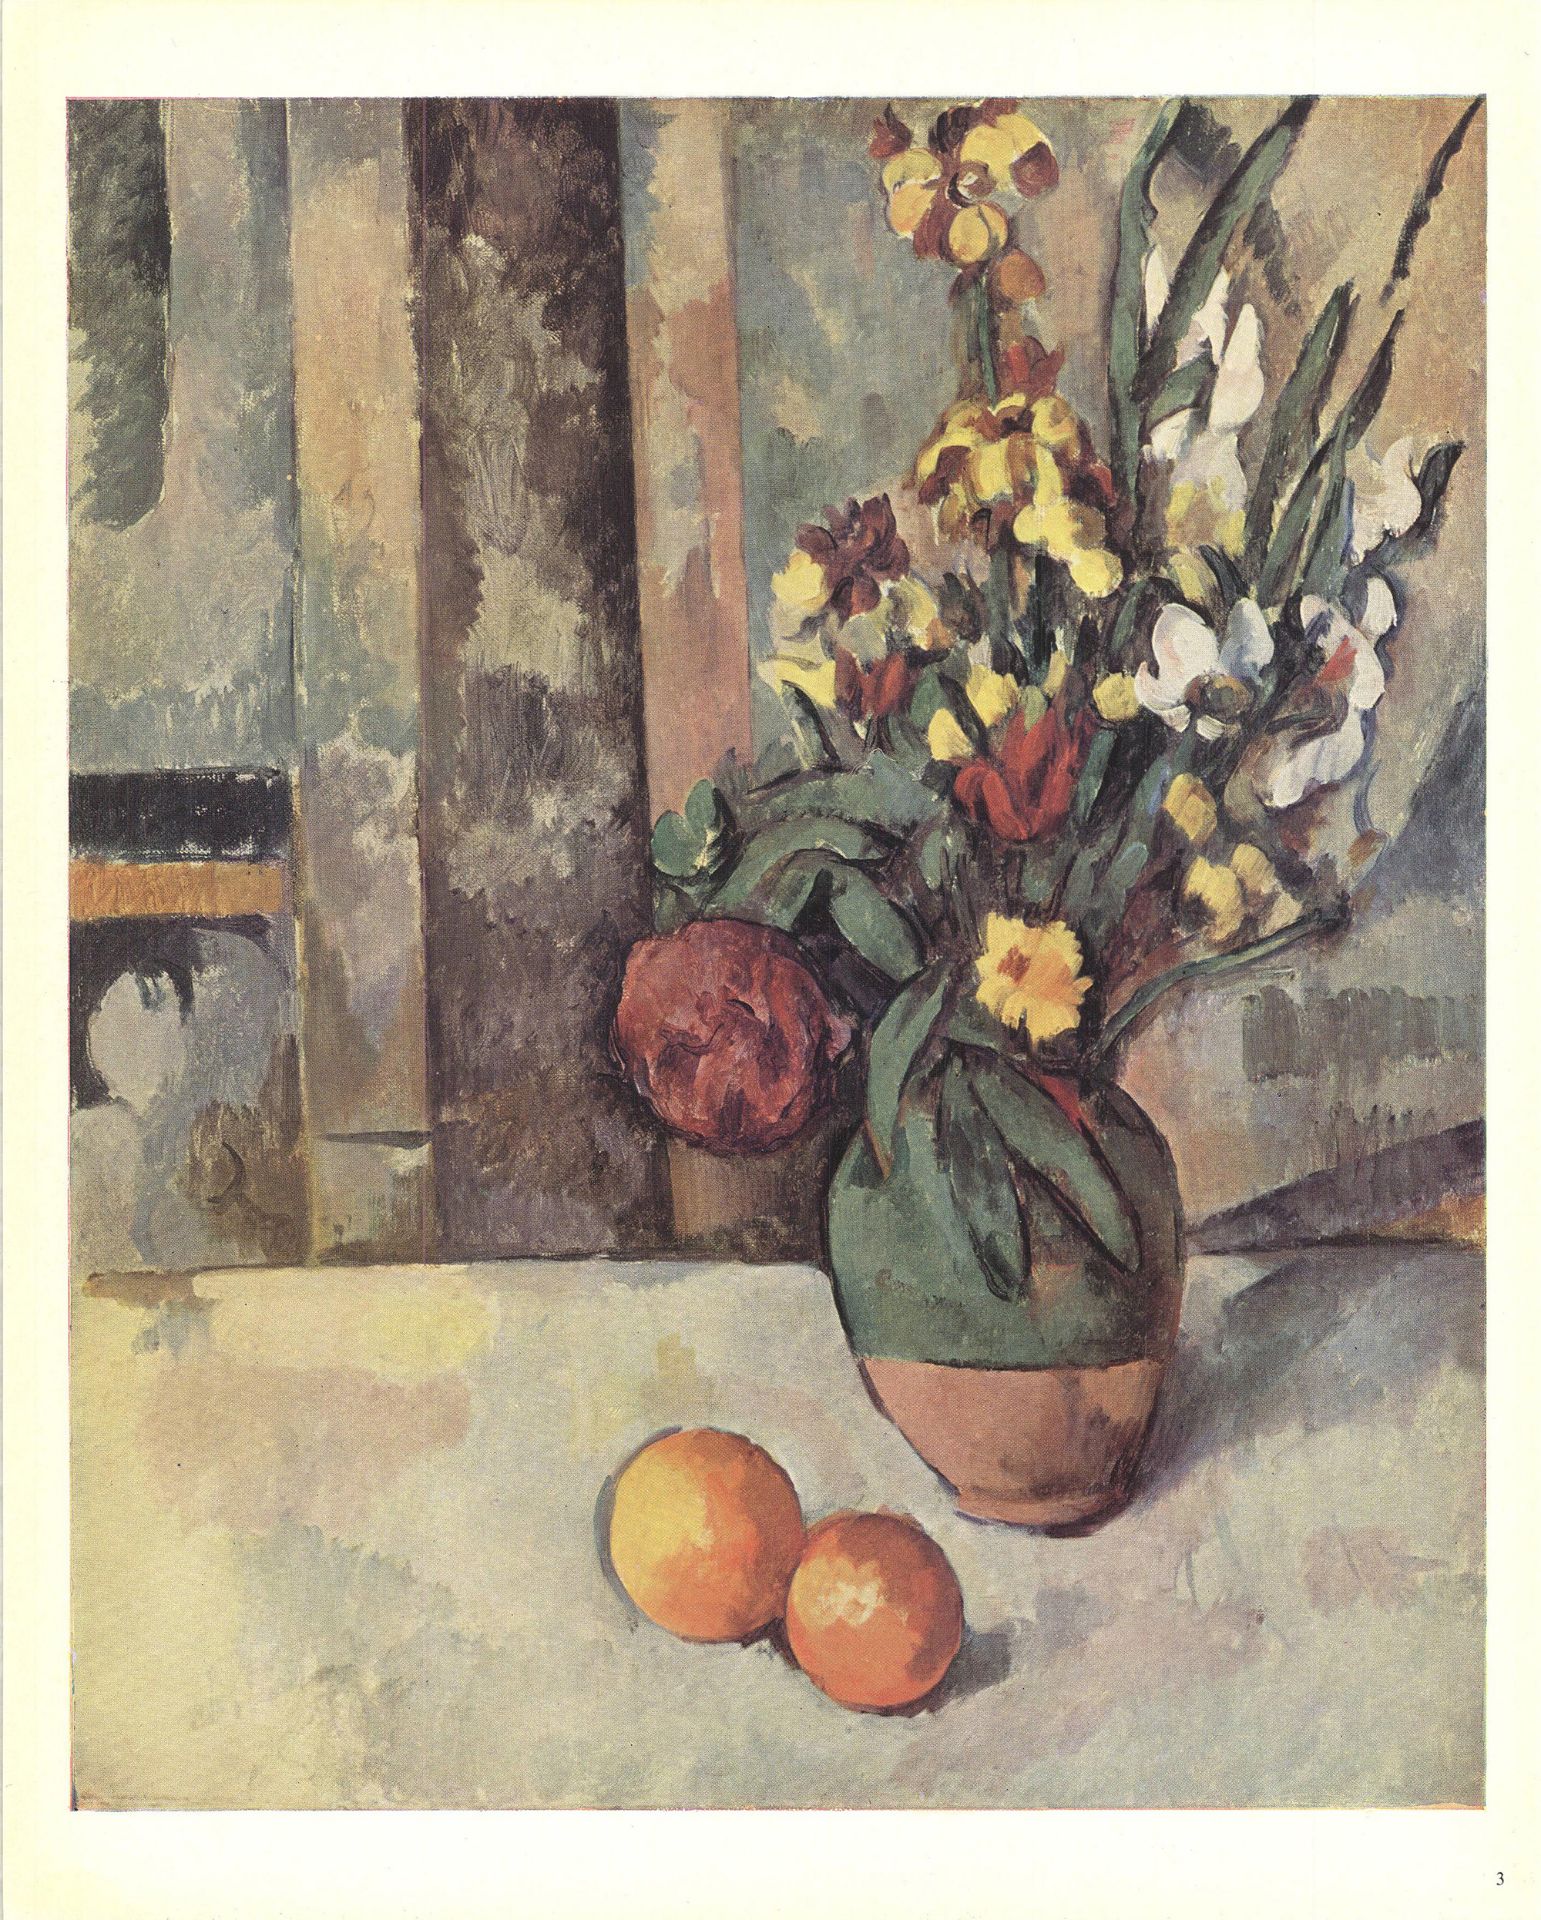 Paul Cezanne - Vase of Flowers and Apples